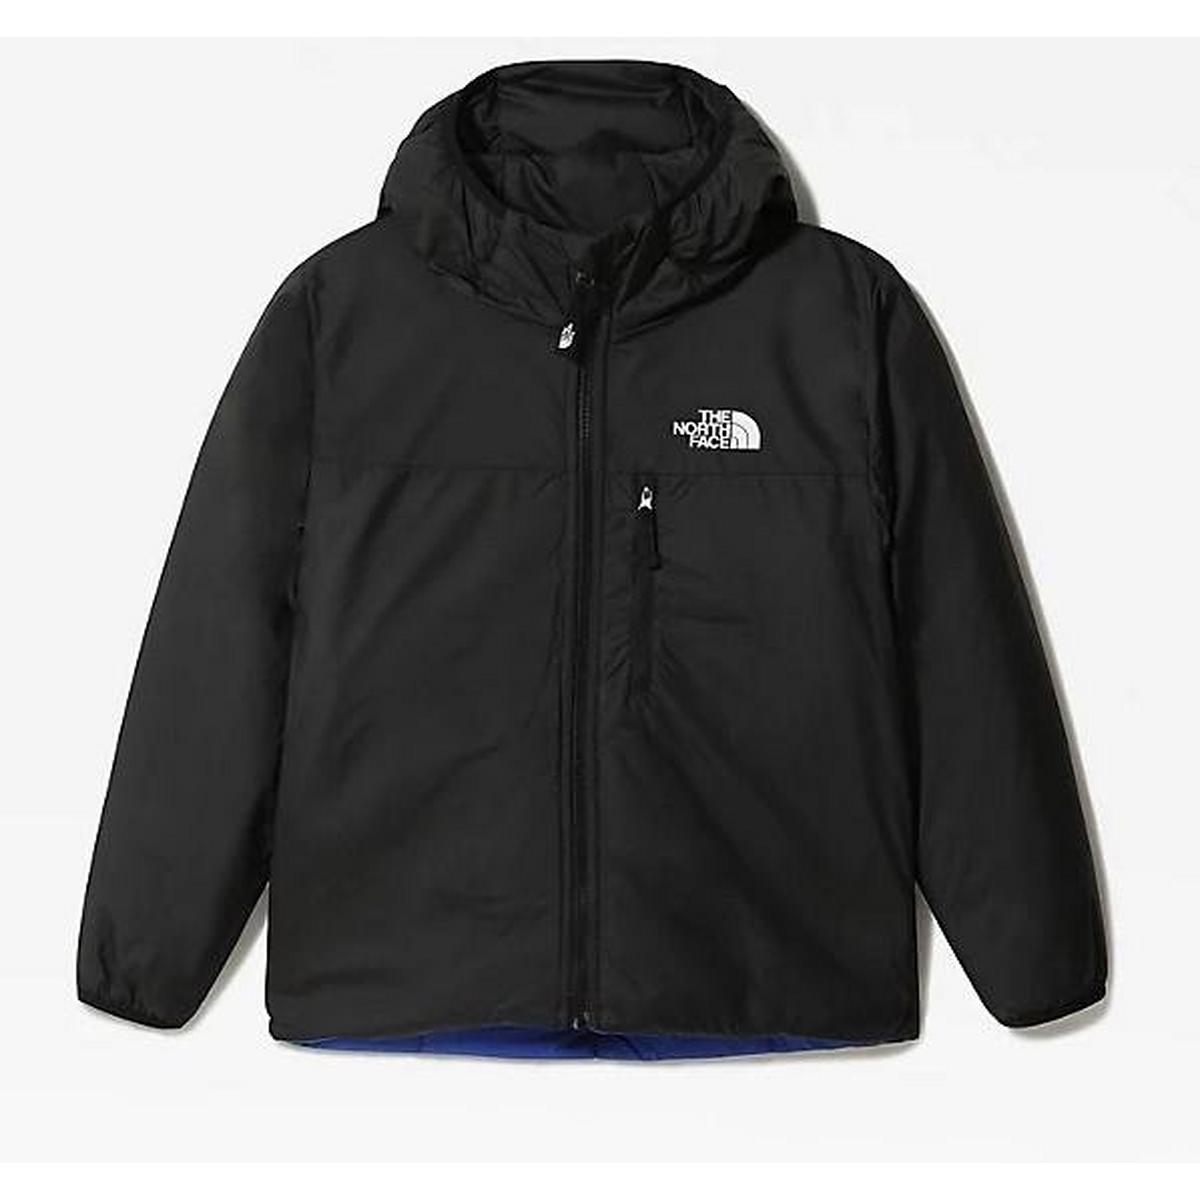 The North Face Kids' The North Face Reversible Perrito Jacket - Blue